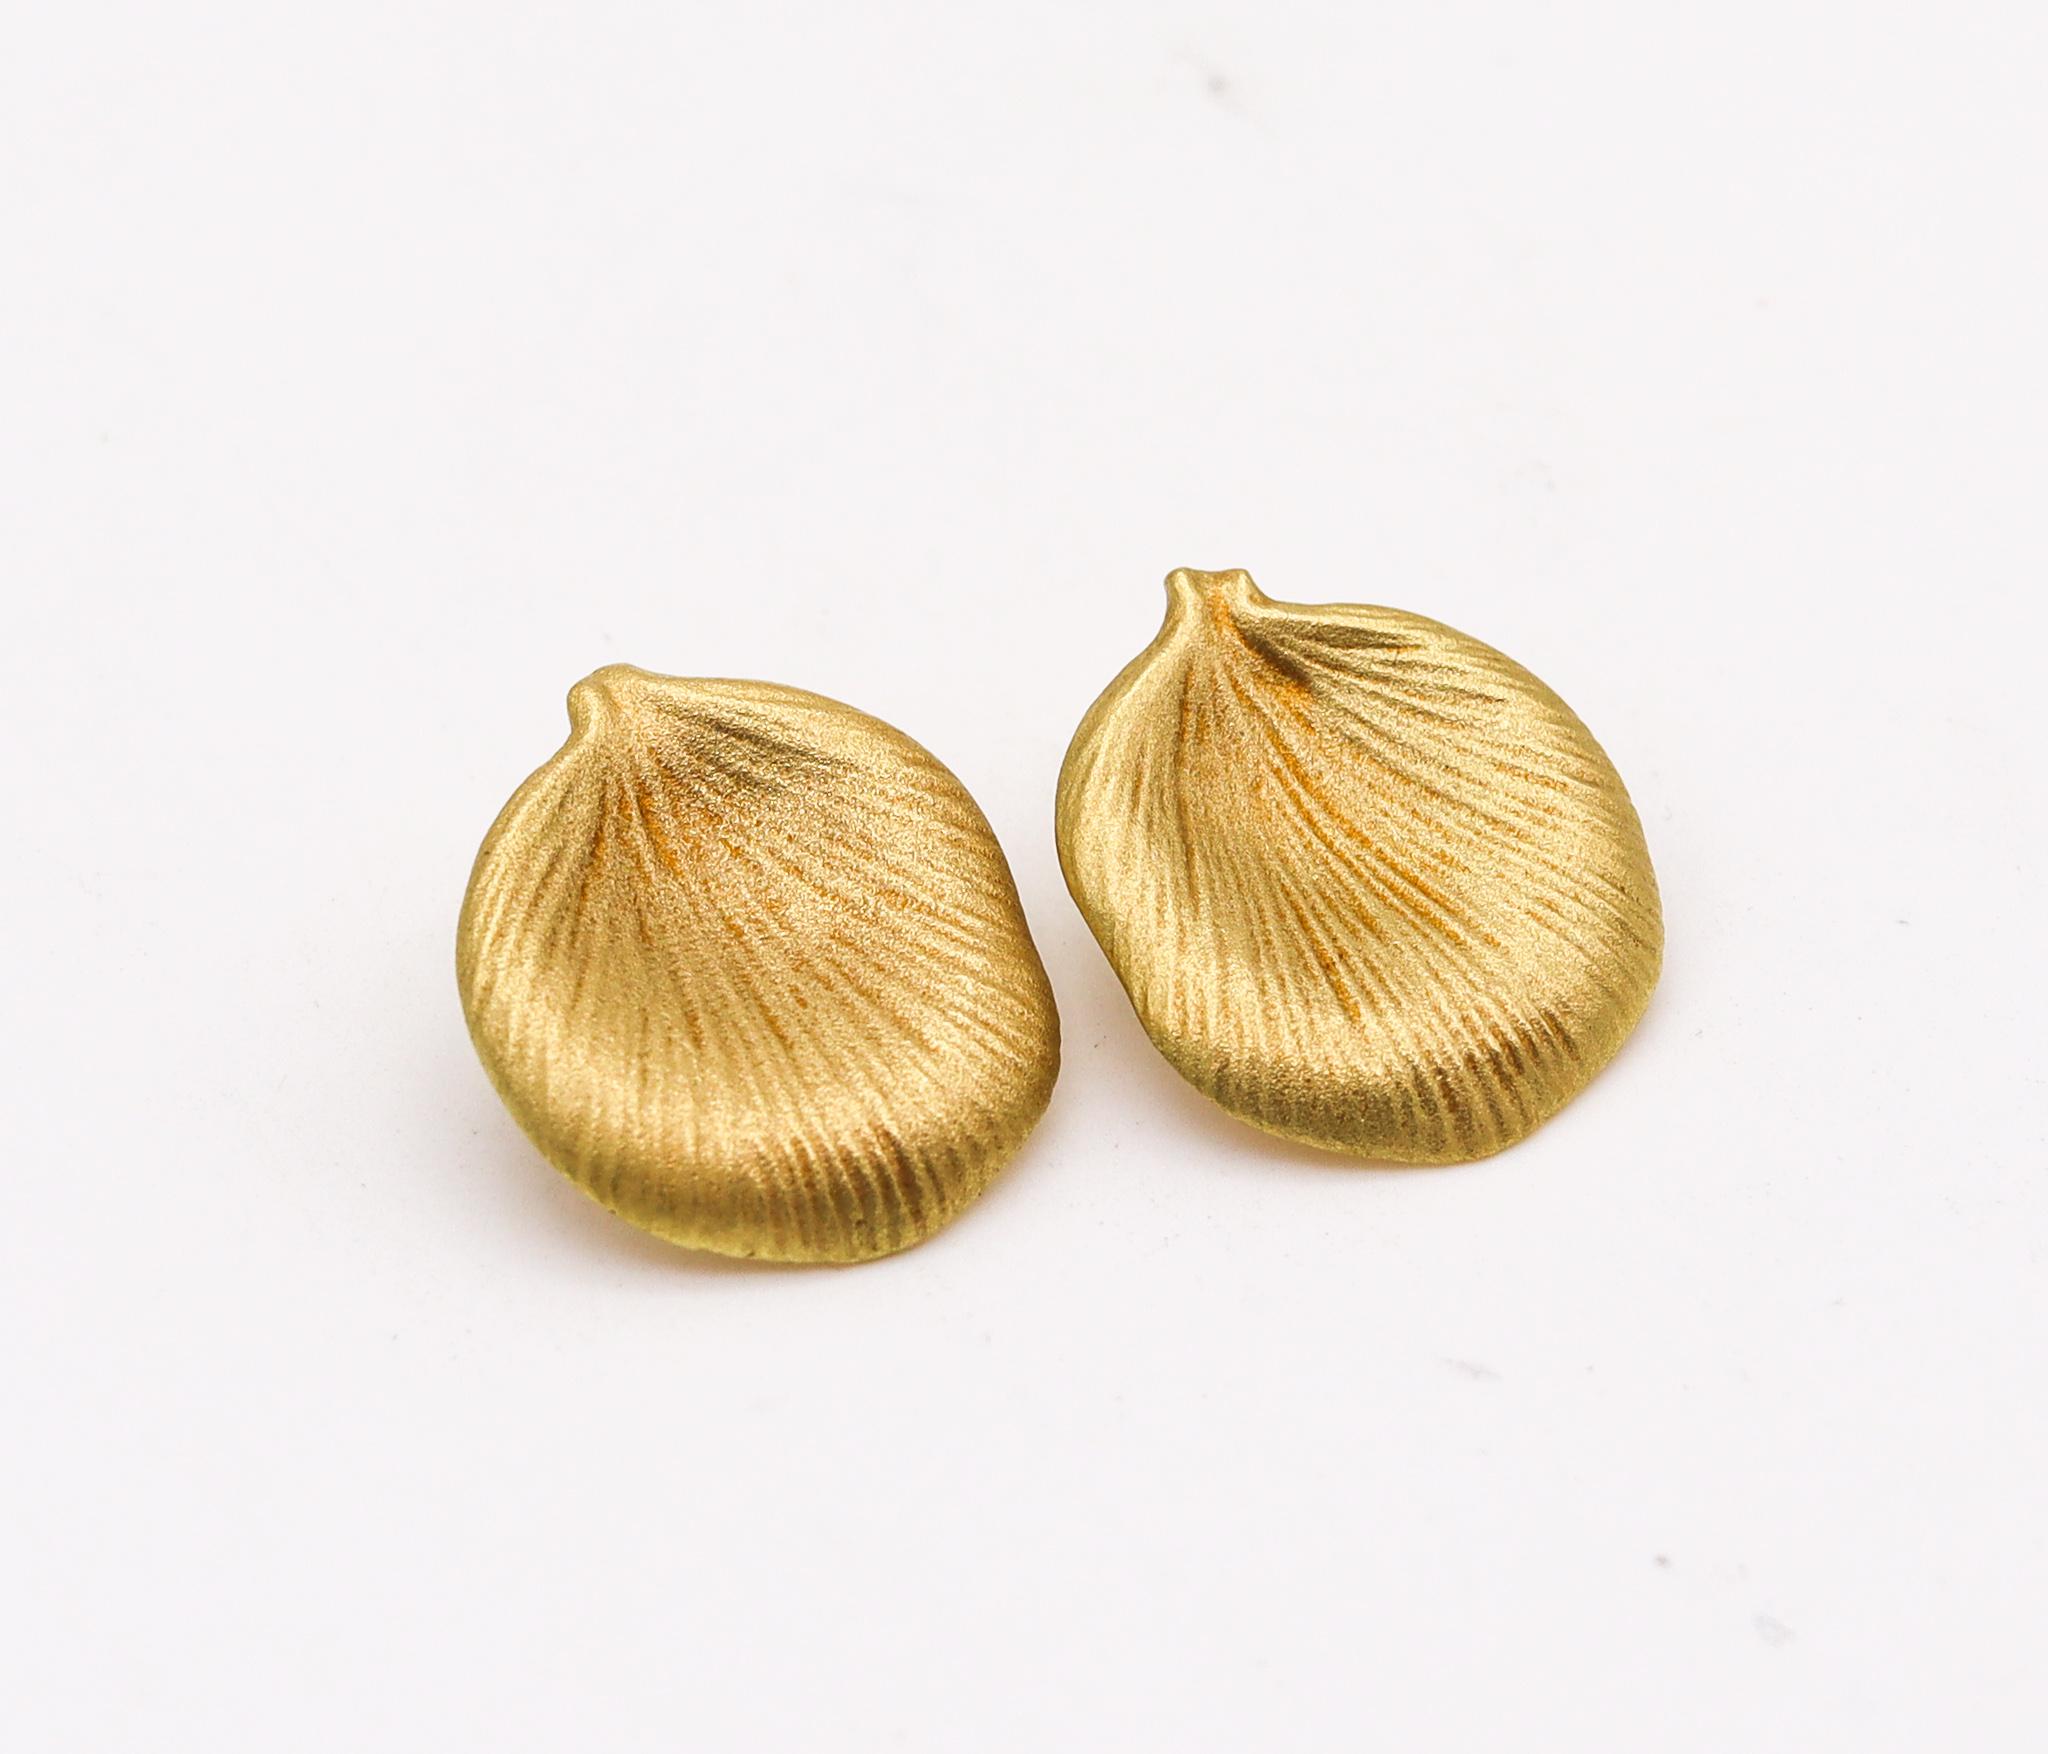 Petals earrings designed by Angela Cummings.

Beautiful pair of earrings inspired by the nature, created by Angela Cummings at her atelier in New York city, back in the 1979. This petals clip-on earrings are an iconic design, carefully crafted in